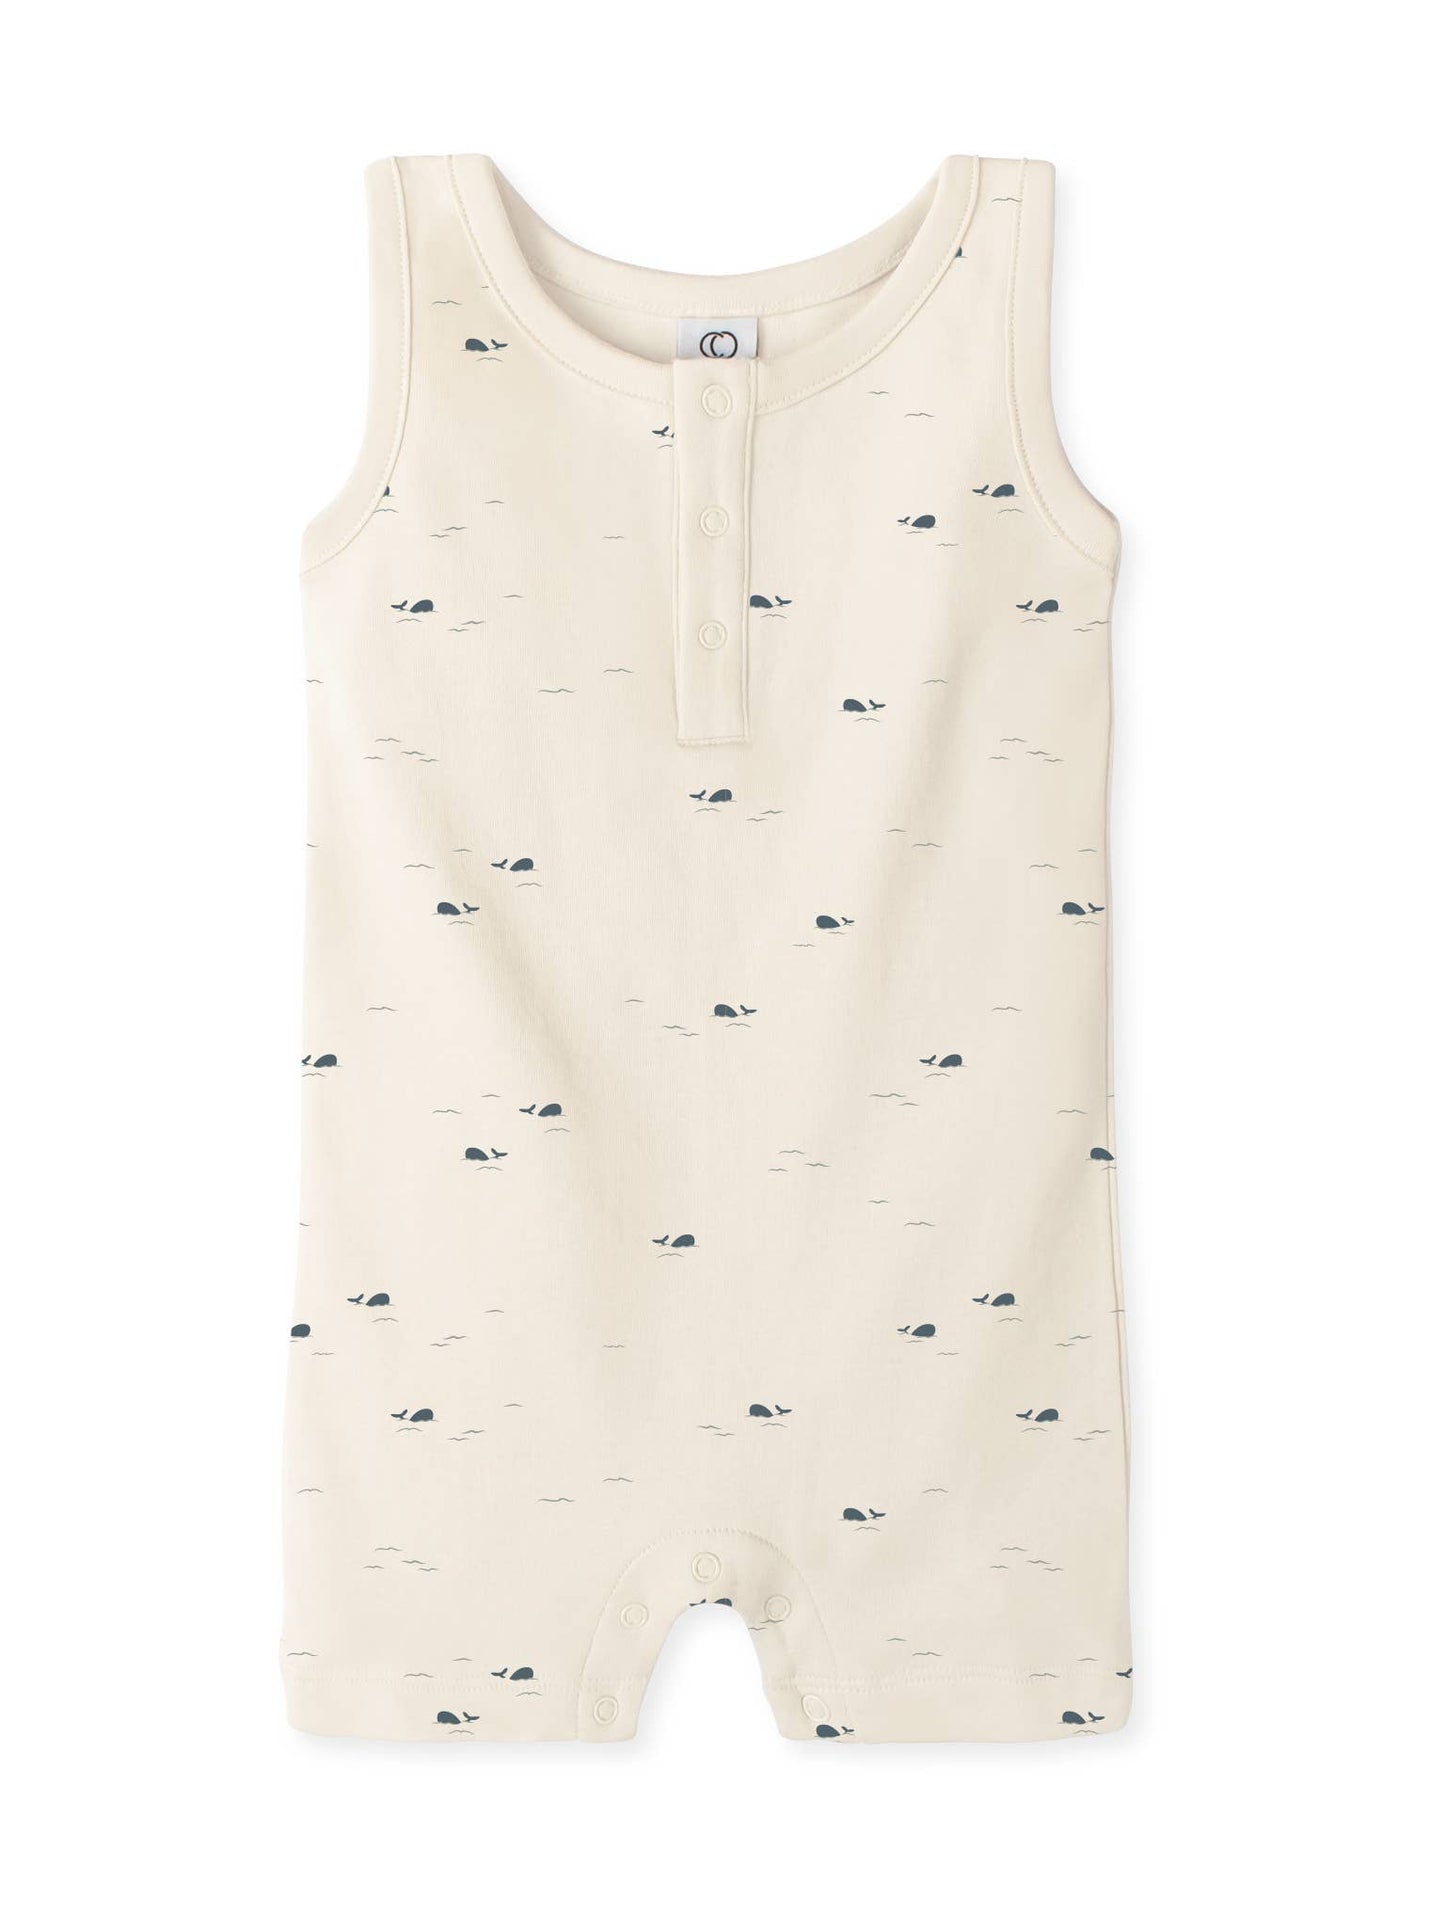 The Nile Romper is an effortless one-piece that will make mornings easier. With snap buttons and 100% organic cotton, your babe will live in this romper all summer.
